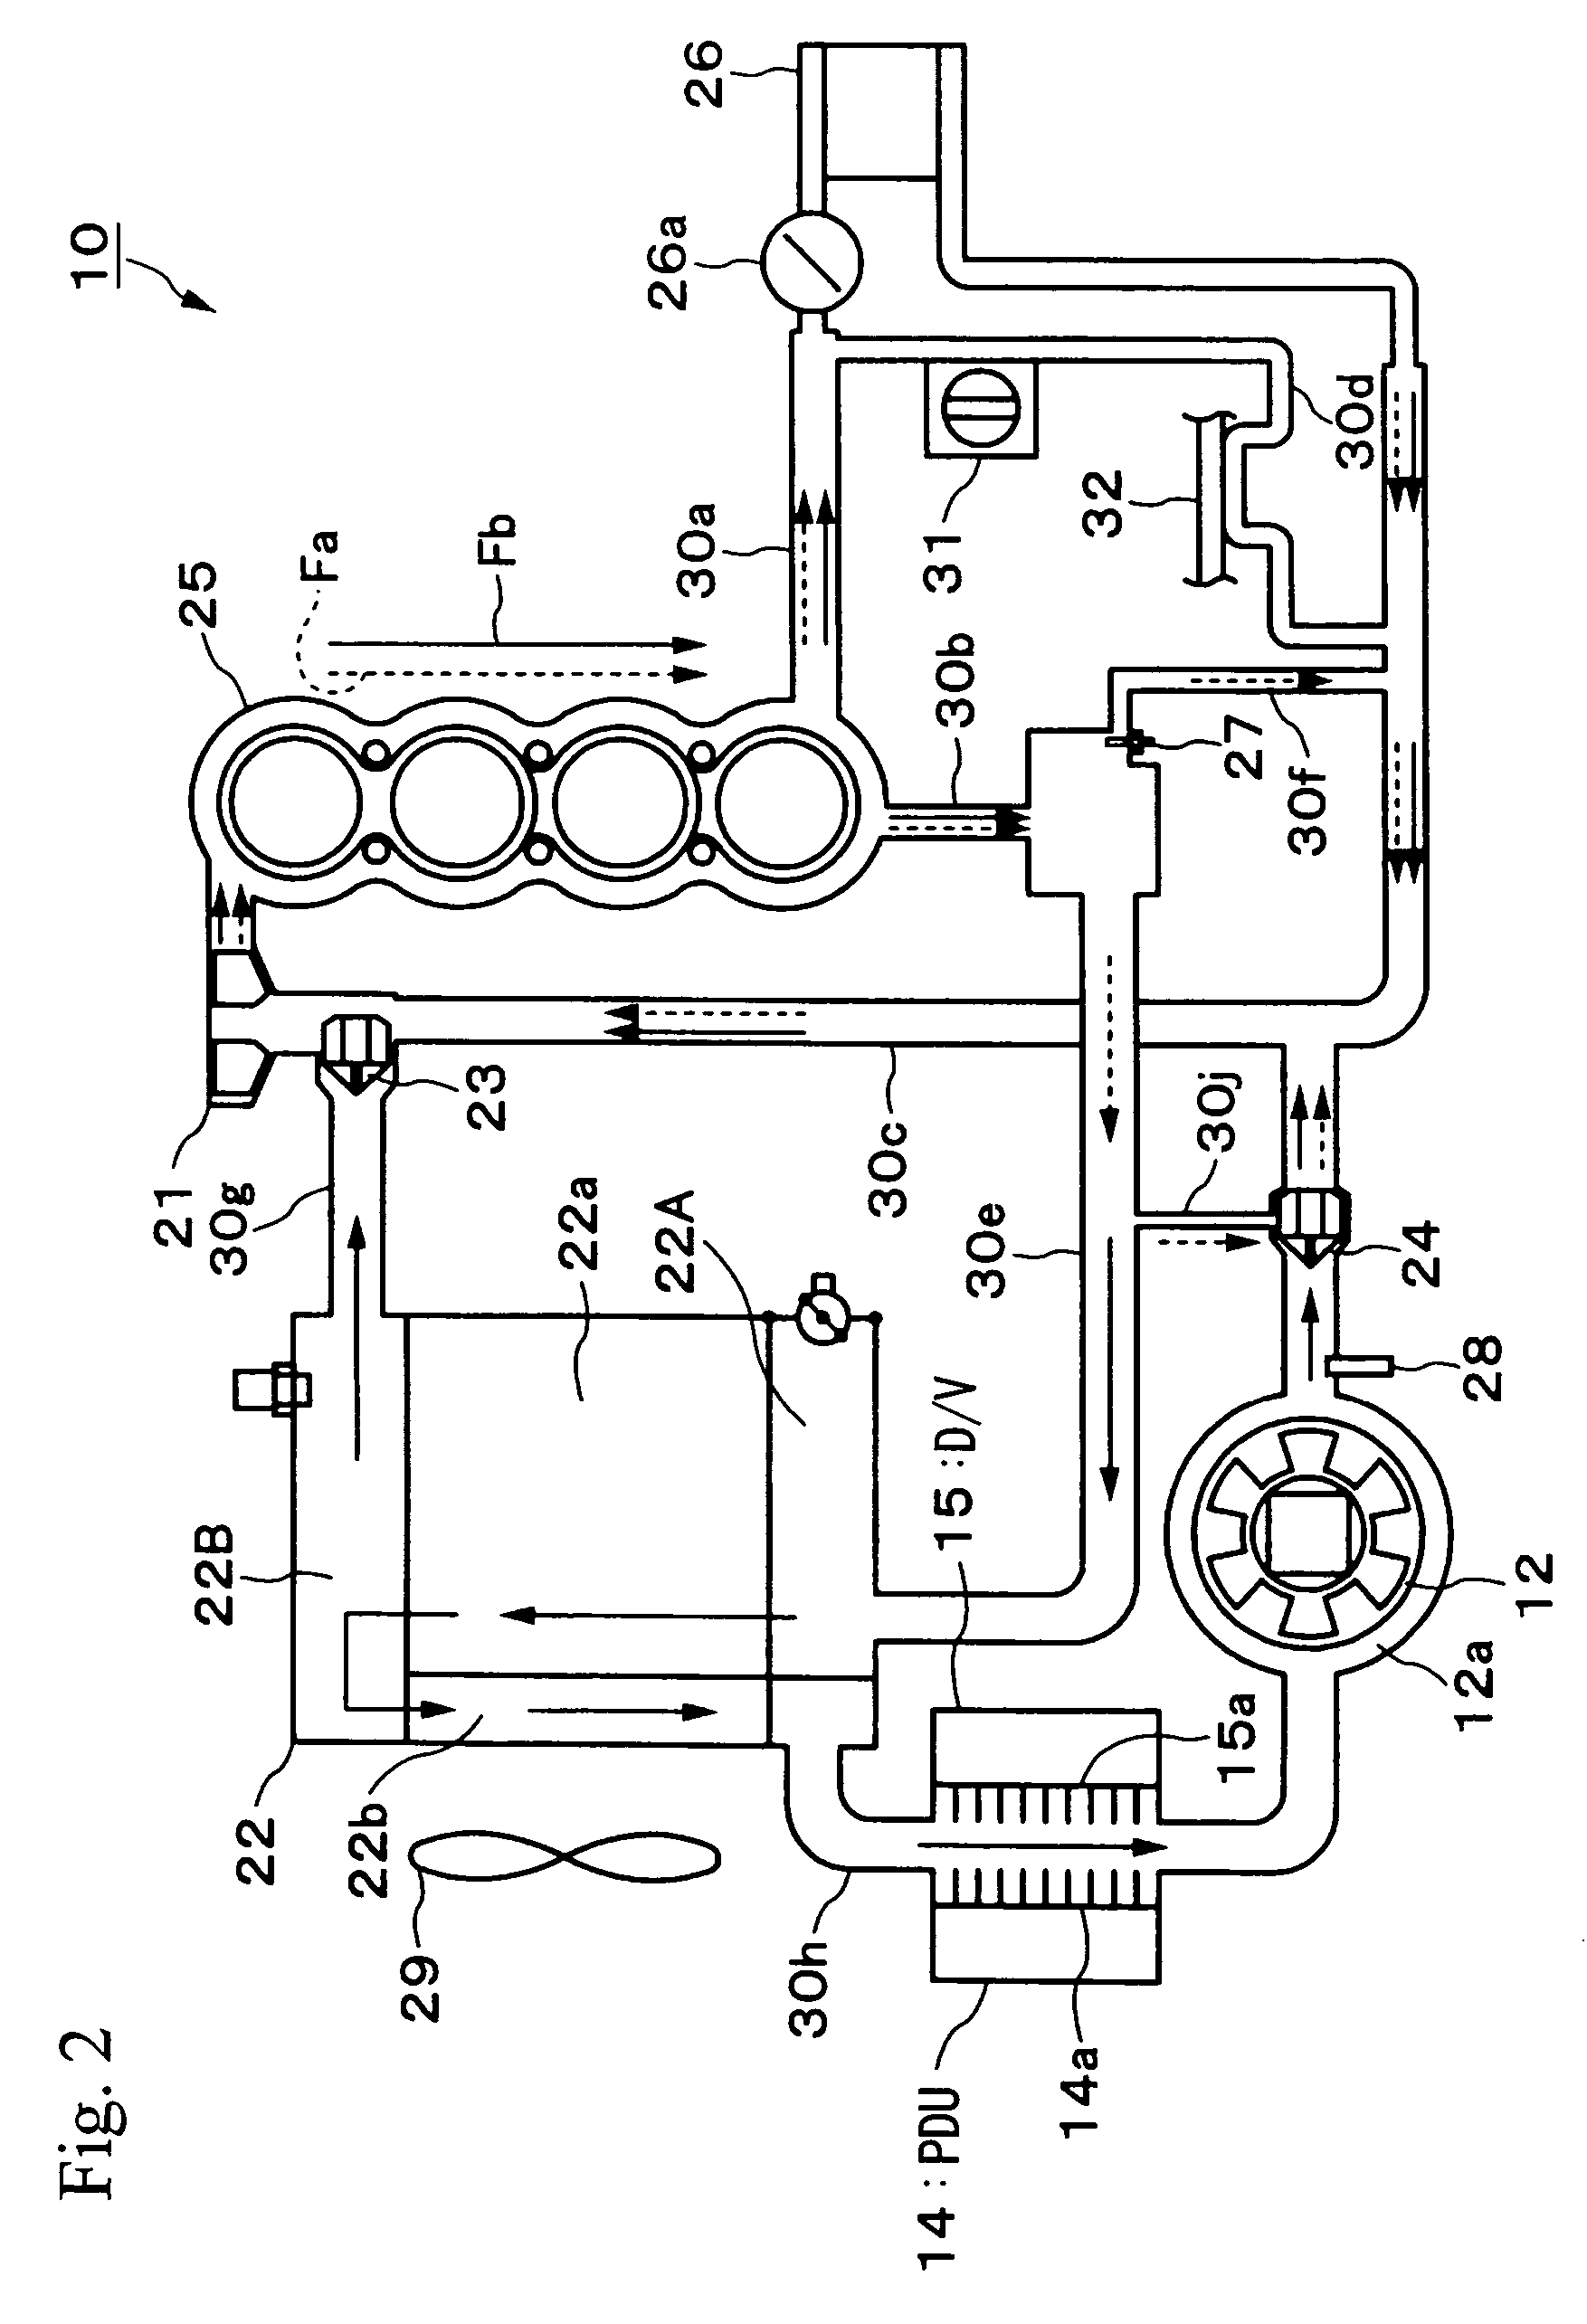 Cooling apparatus for hybrid vehicle